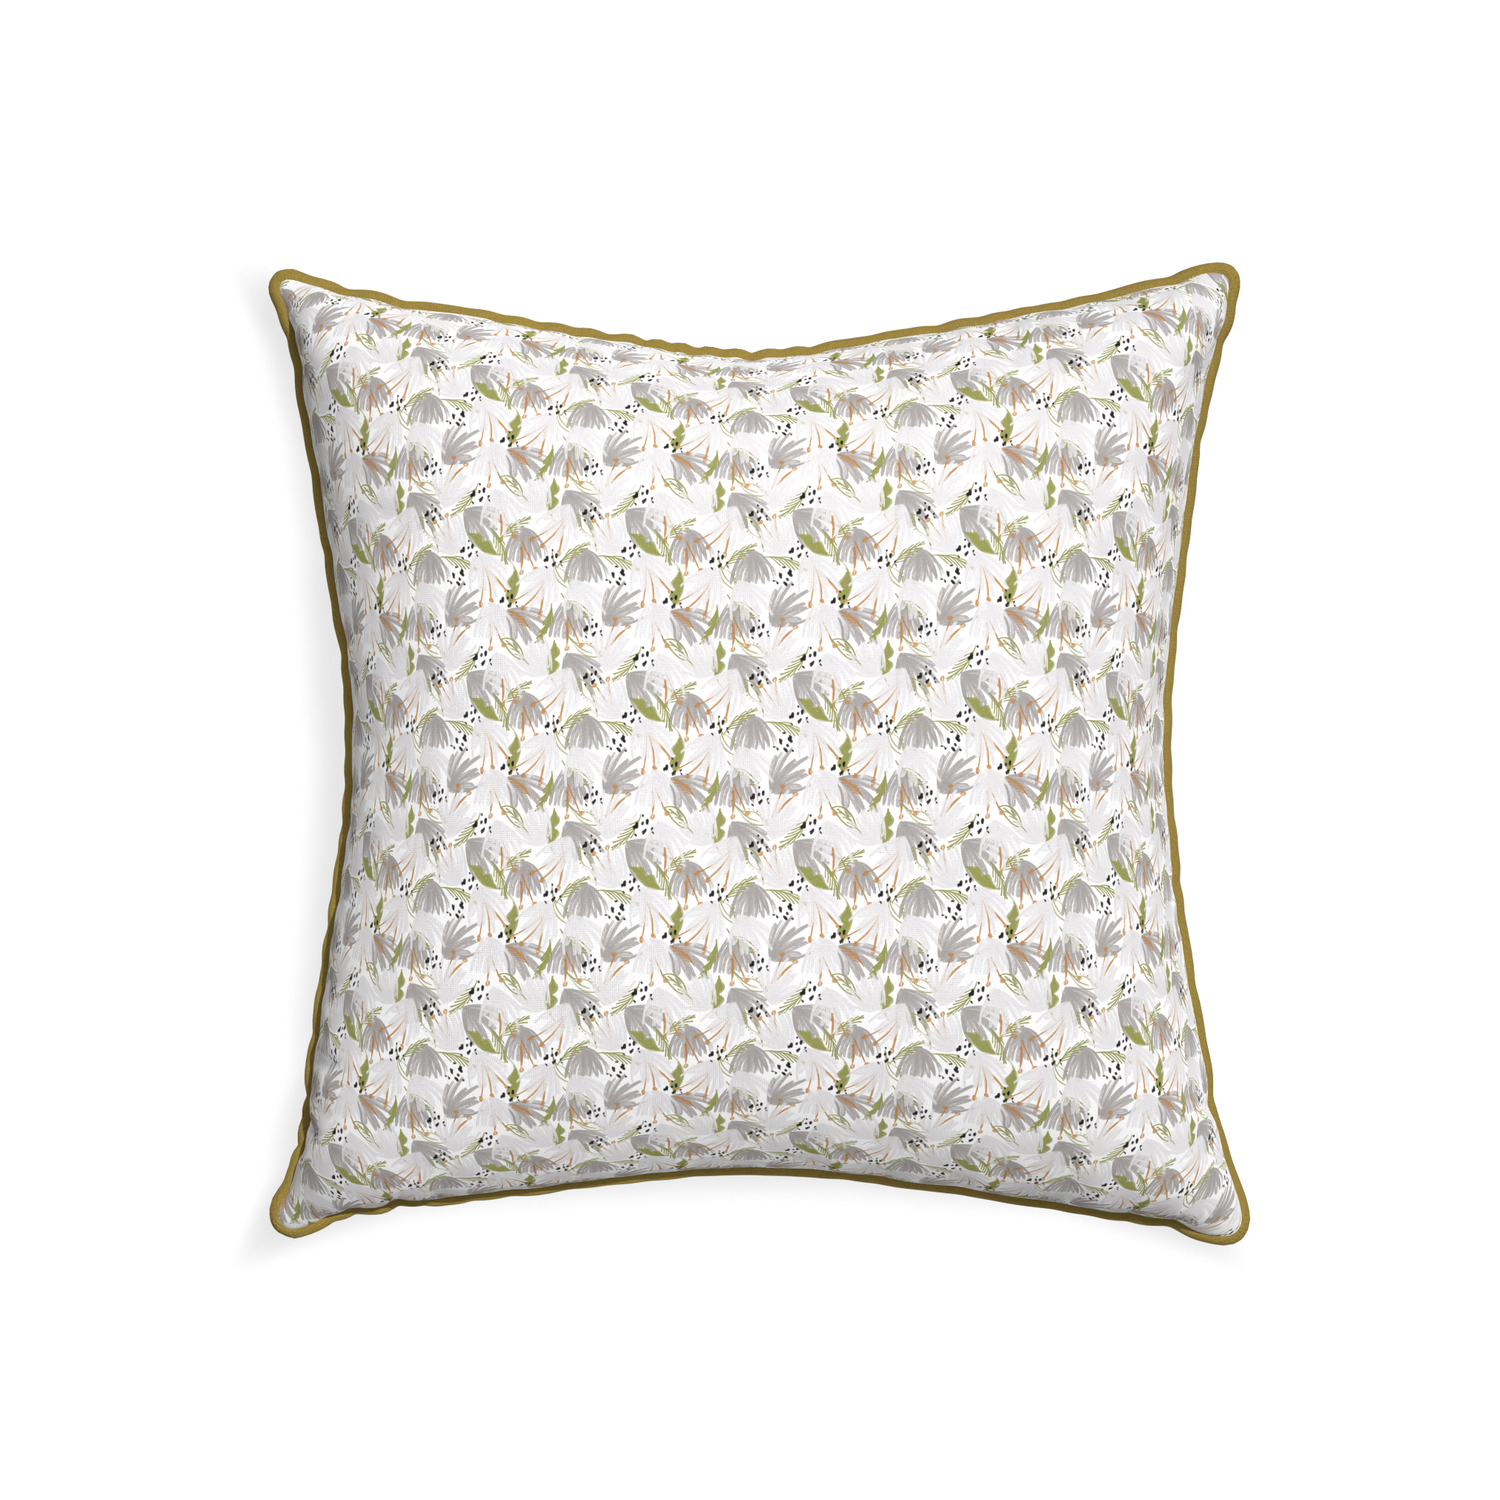 22-square eden grey custom grey floralpillow with c piping on white background